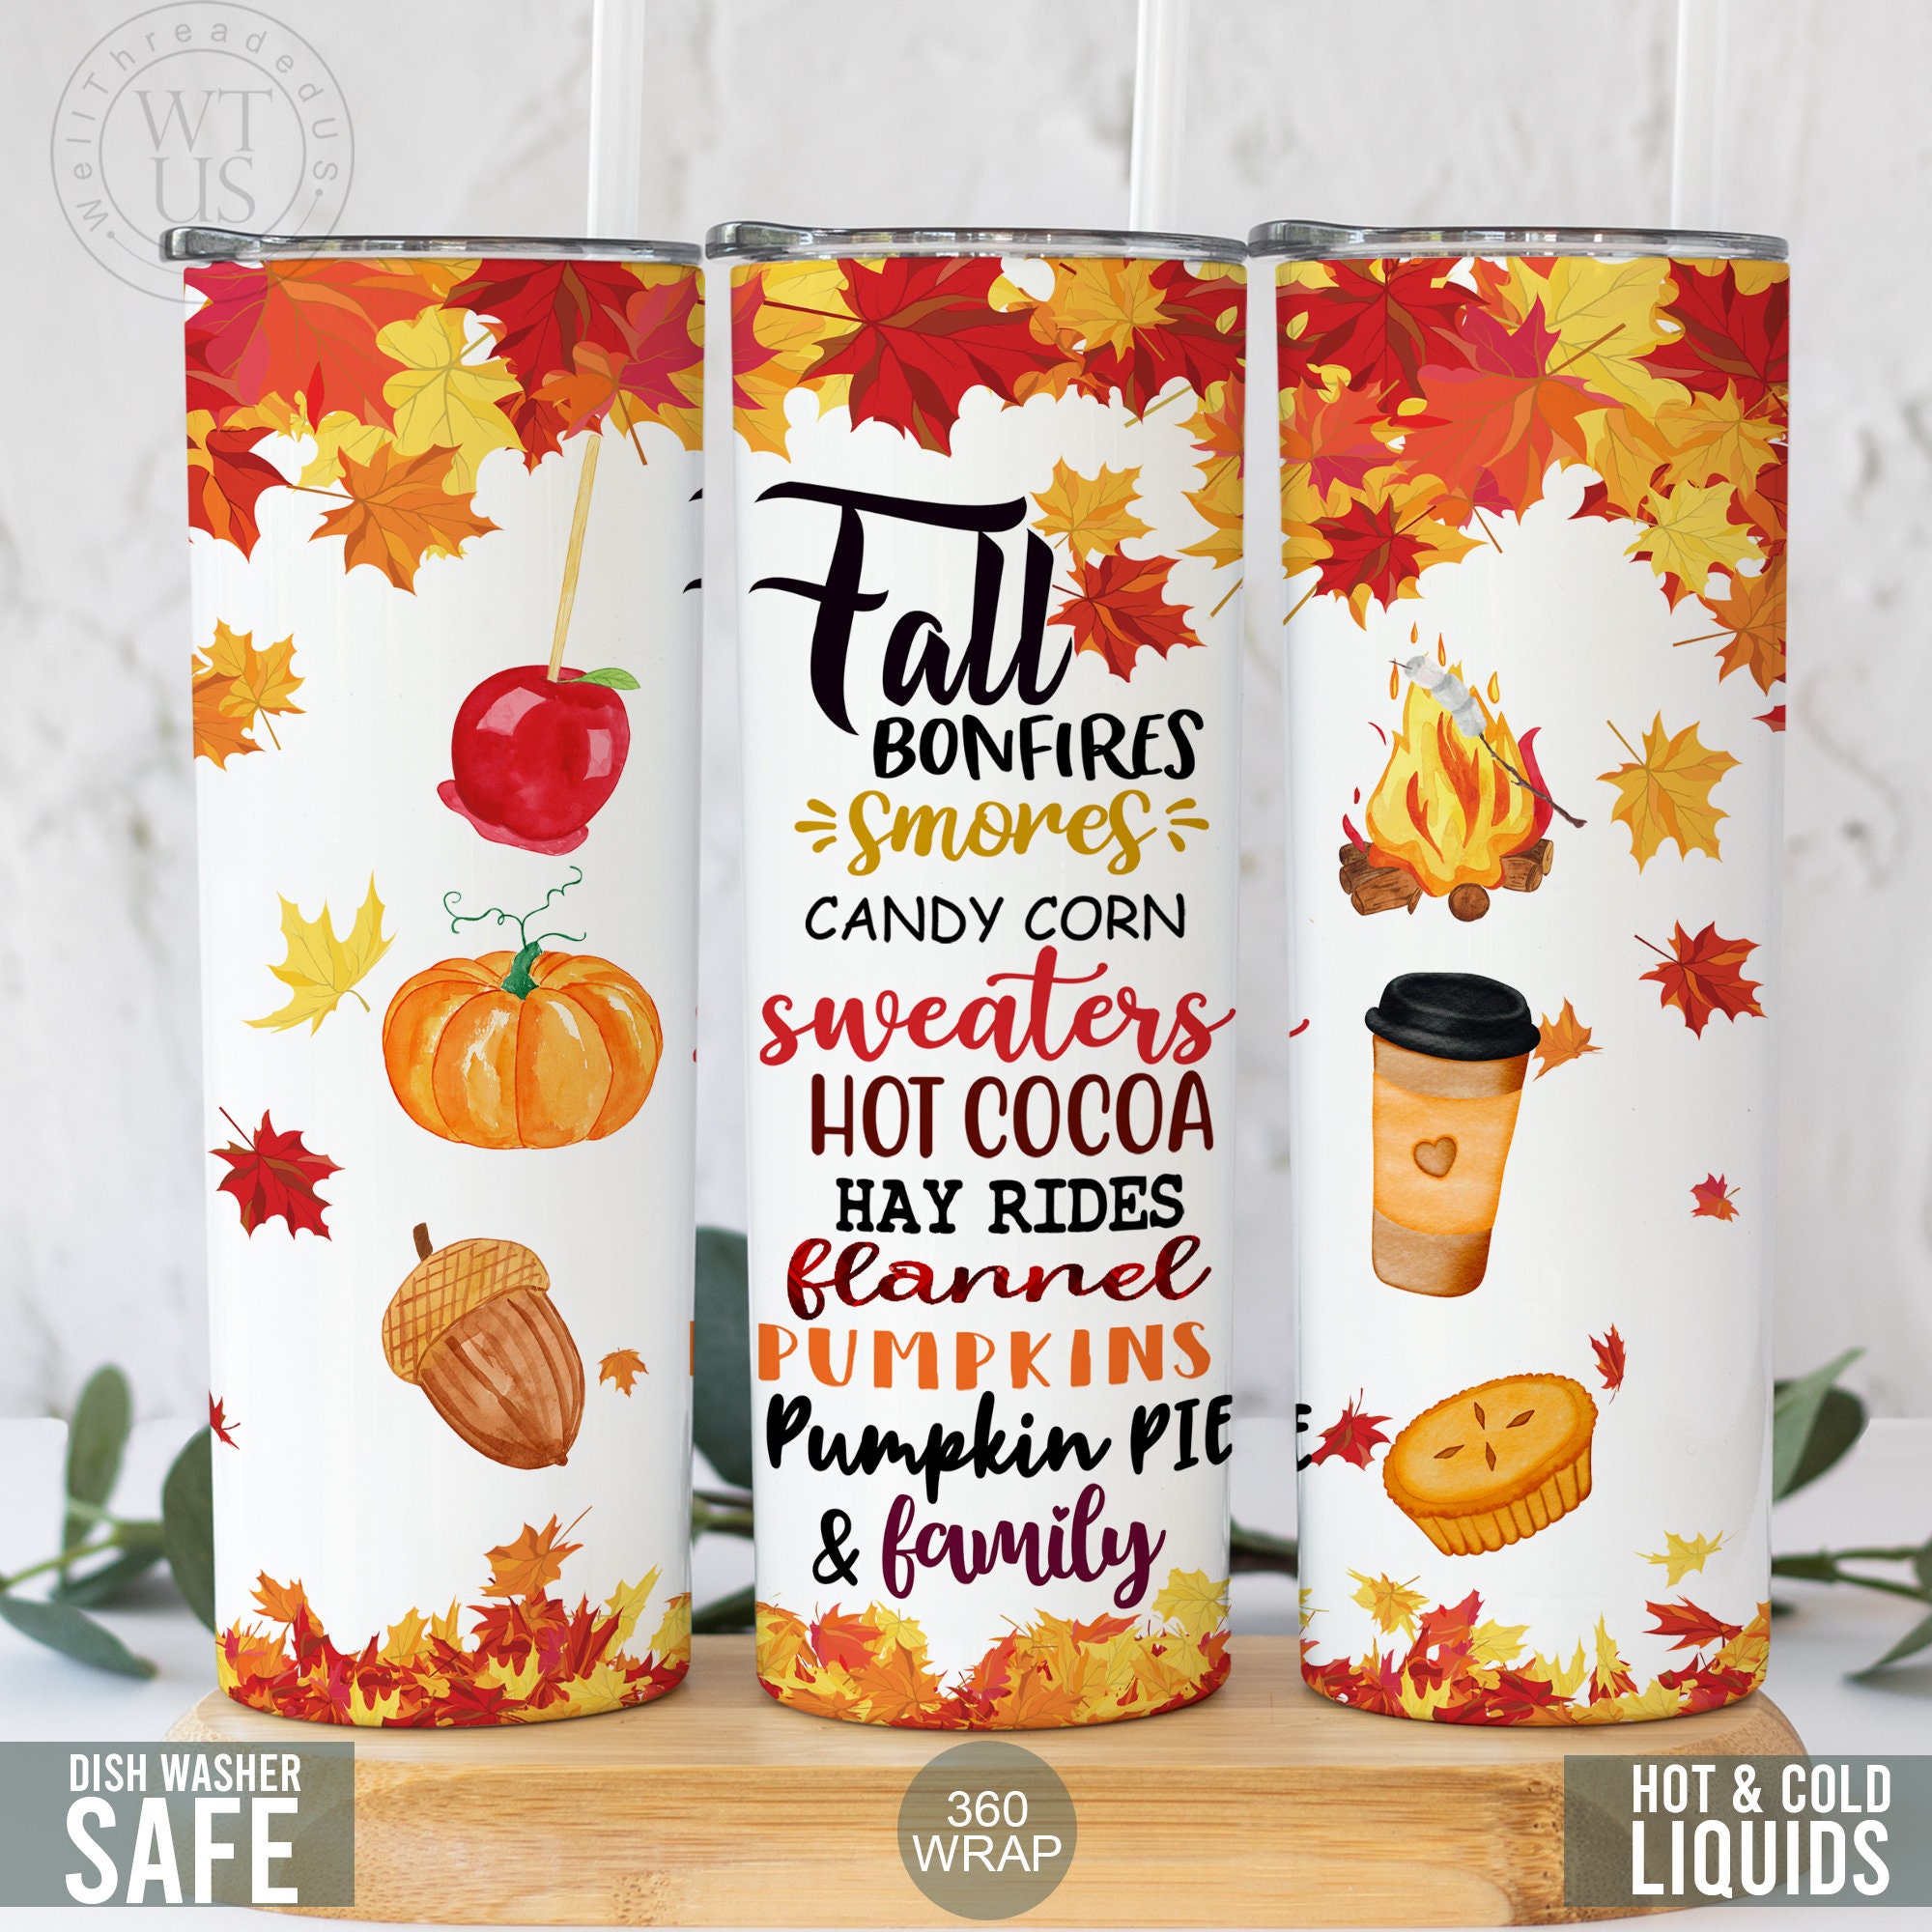 Fall Red Gold Glitter Sublimation Tumbler 20oz Skinny Design, 20oz Skinny  Glitter Tumbler Design, Tumbler DESIGN ONLY, Fall is in the Air